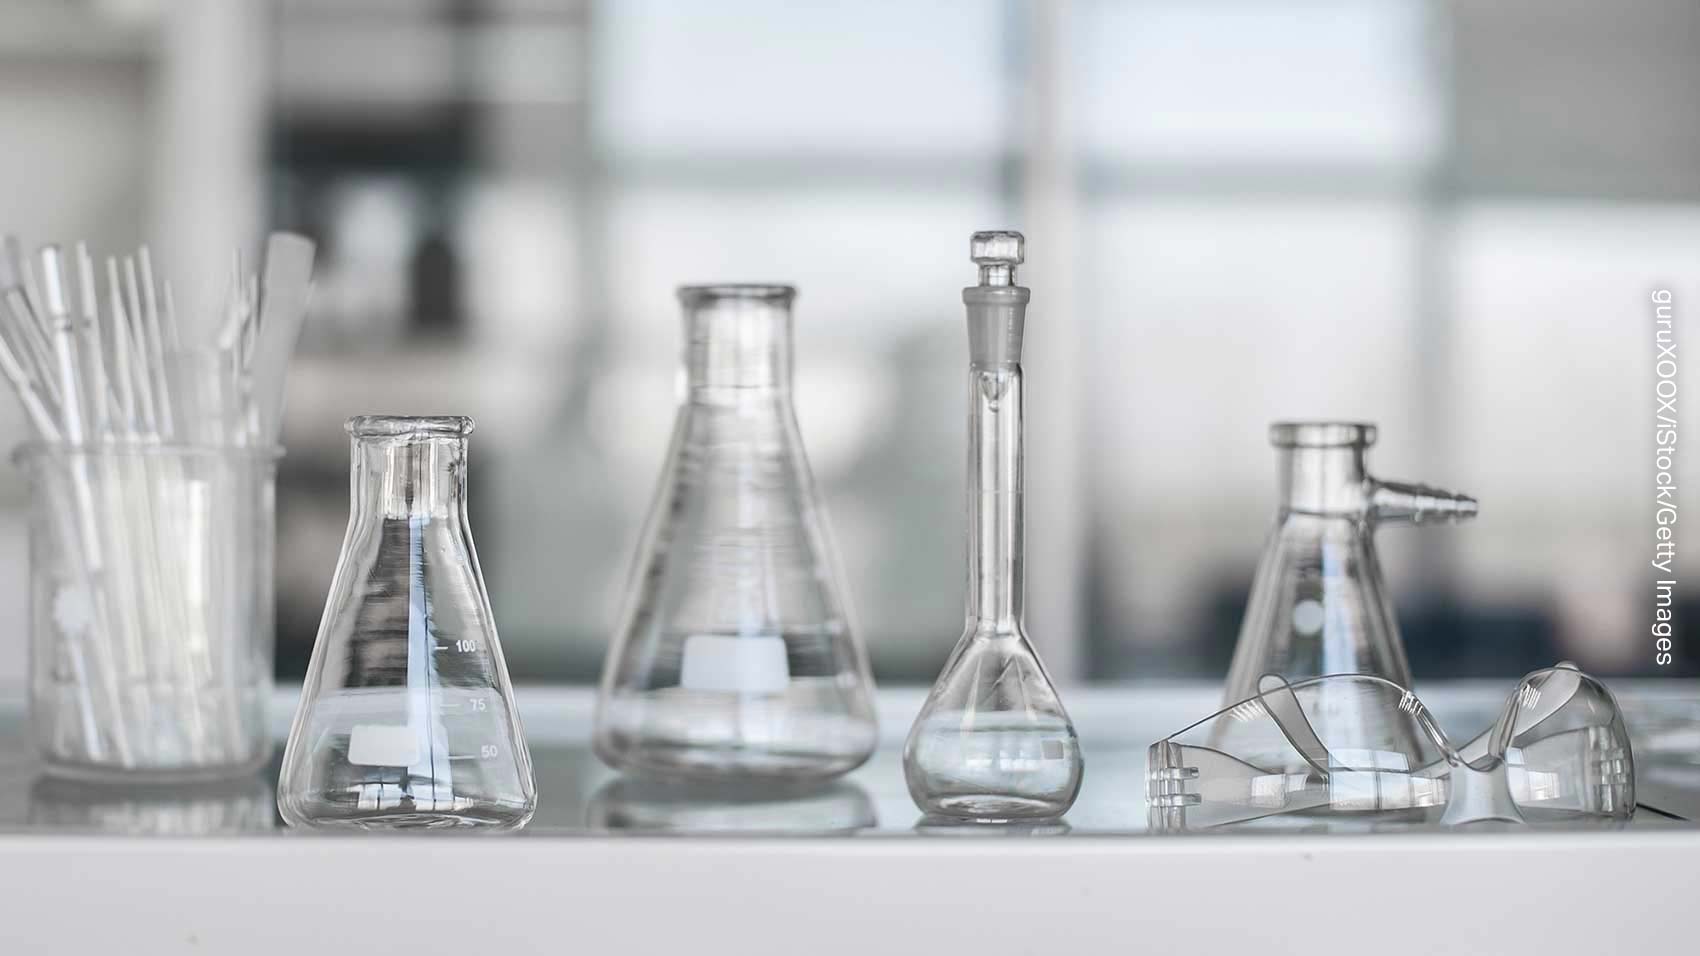 Transparent beakers for chemicals in a lab